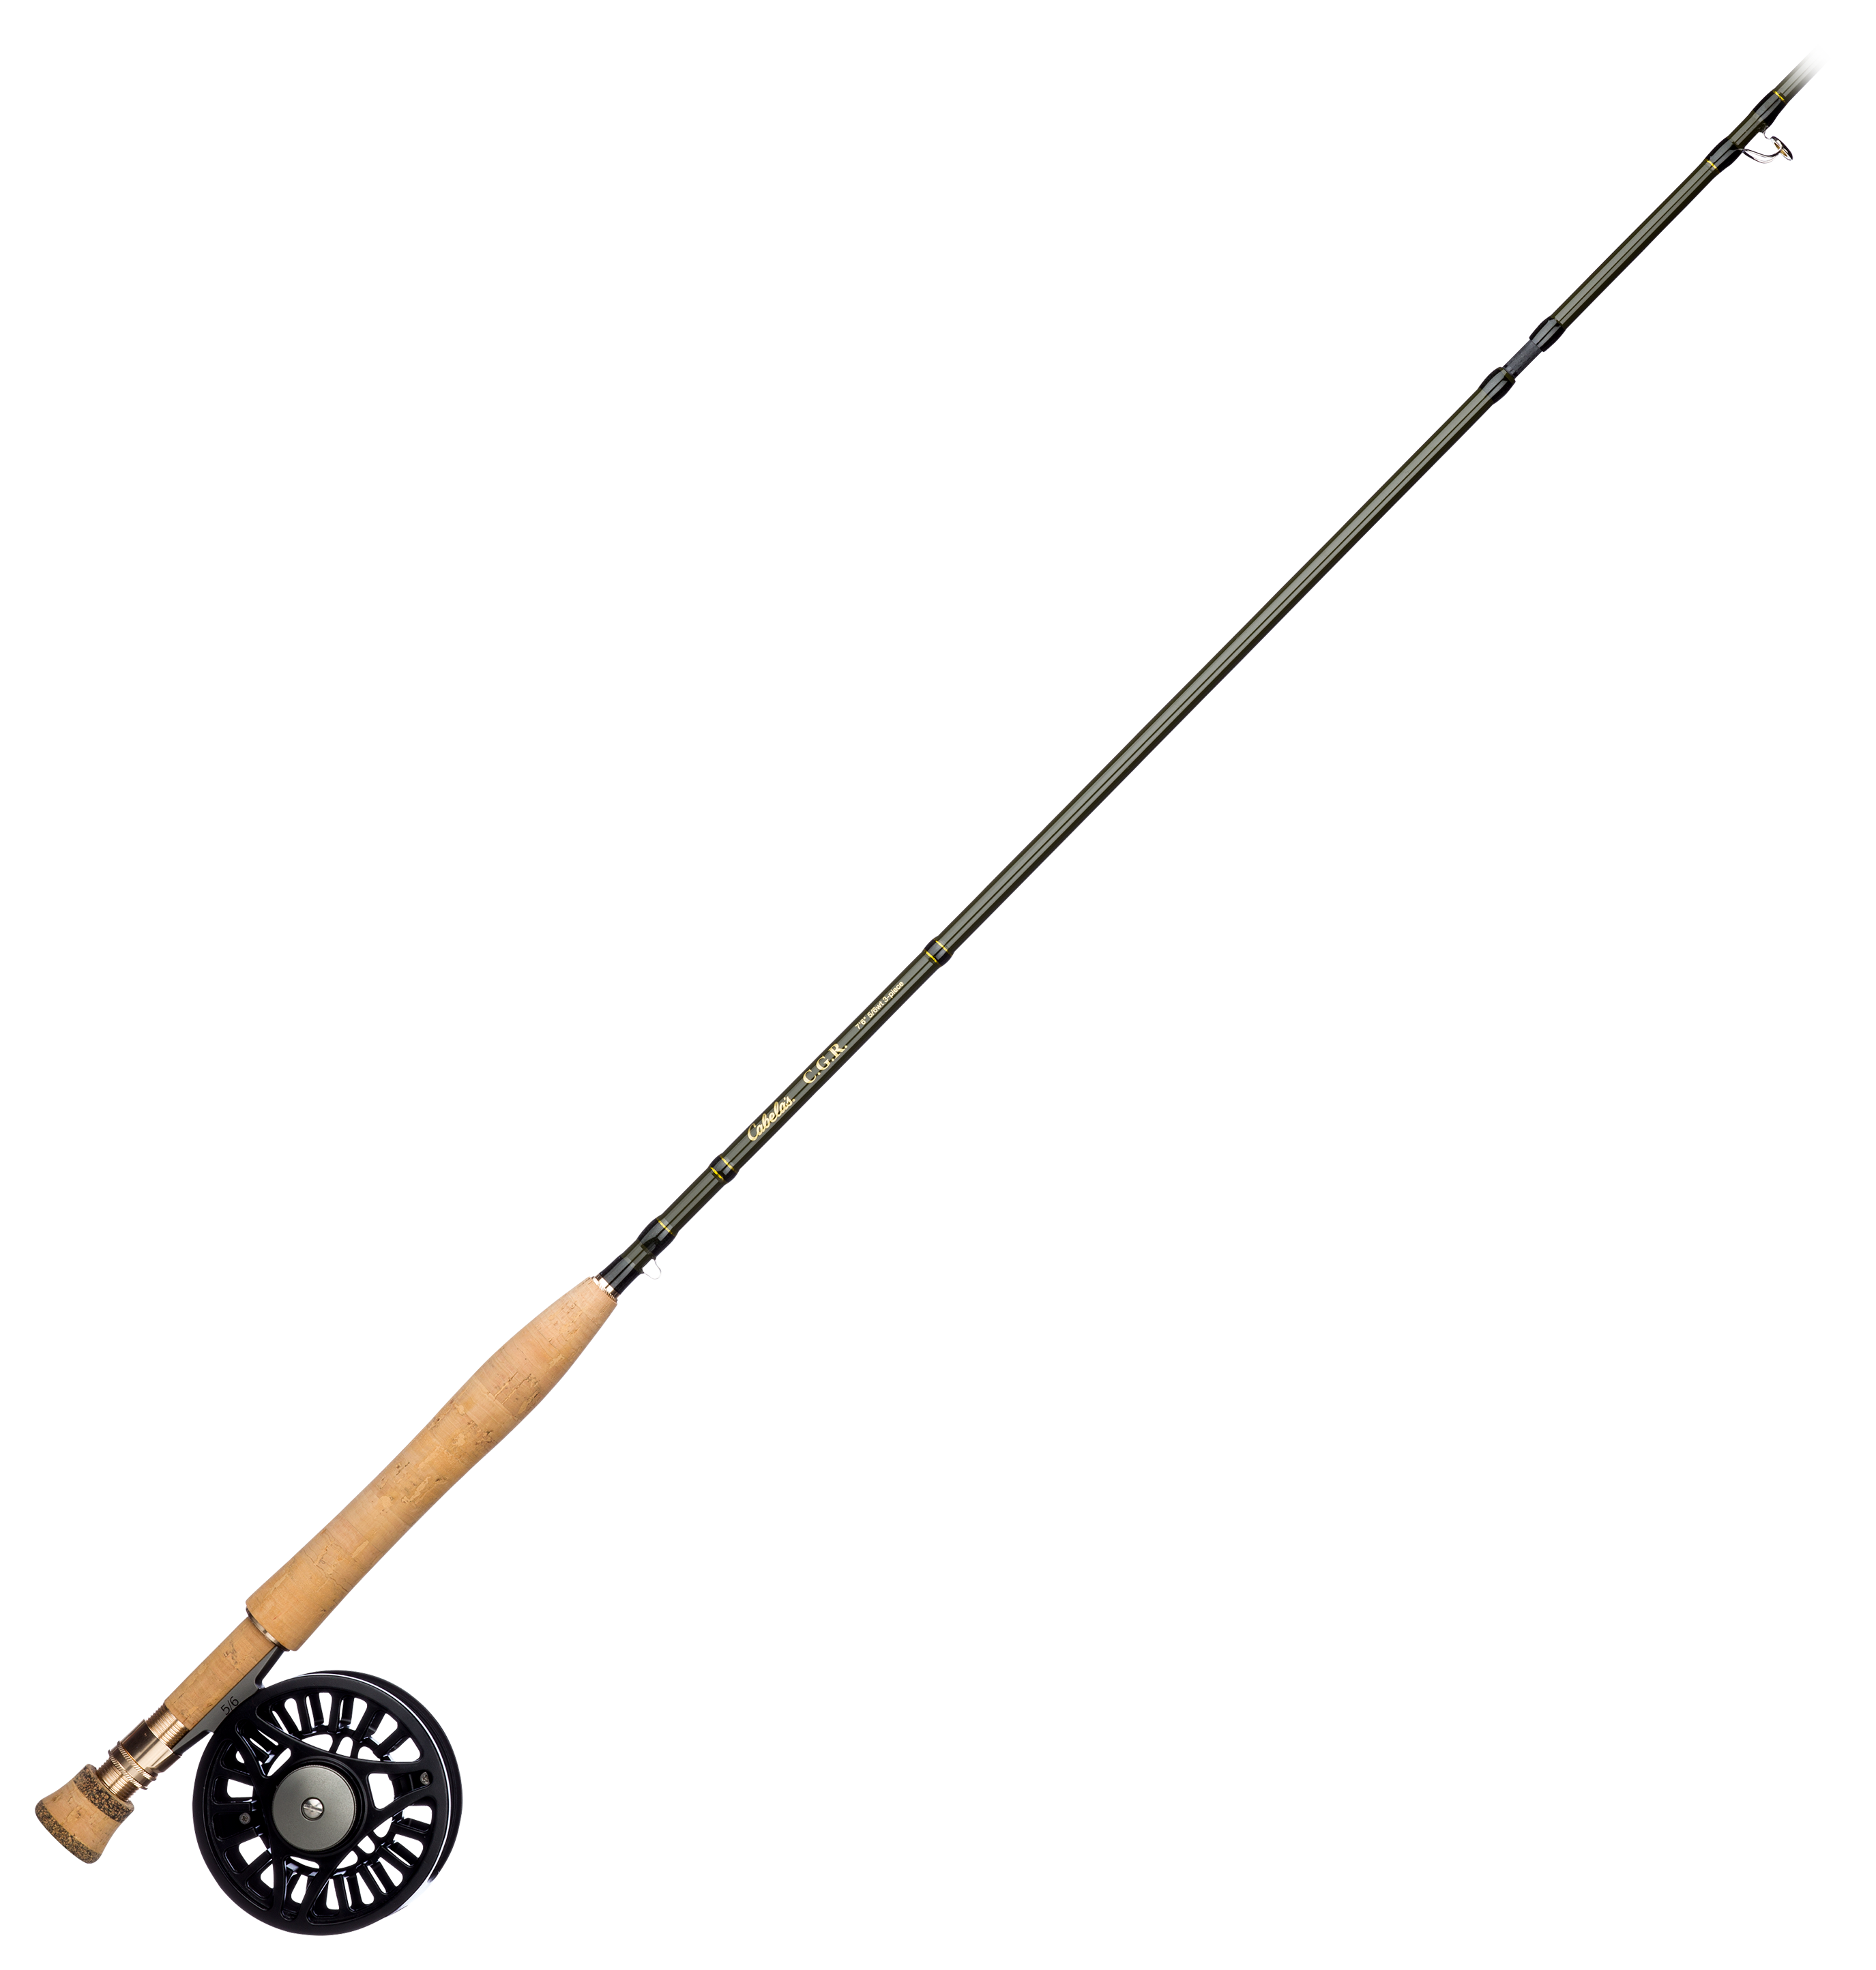 Cabela's Prestige II Reel and CGR Rod Fly Outfit